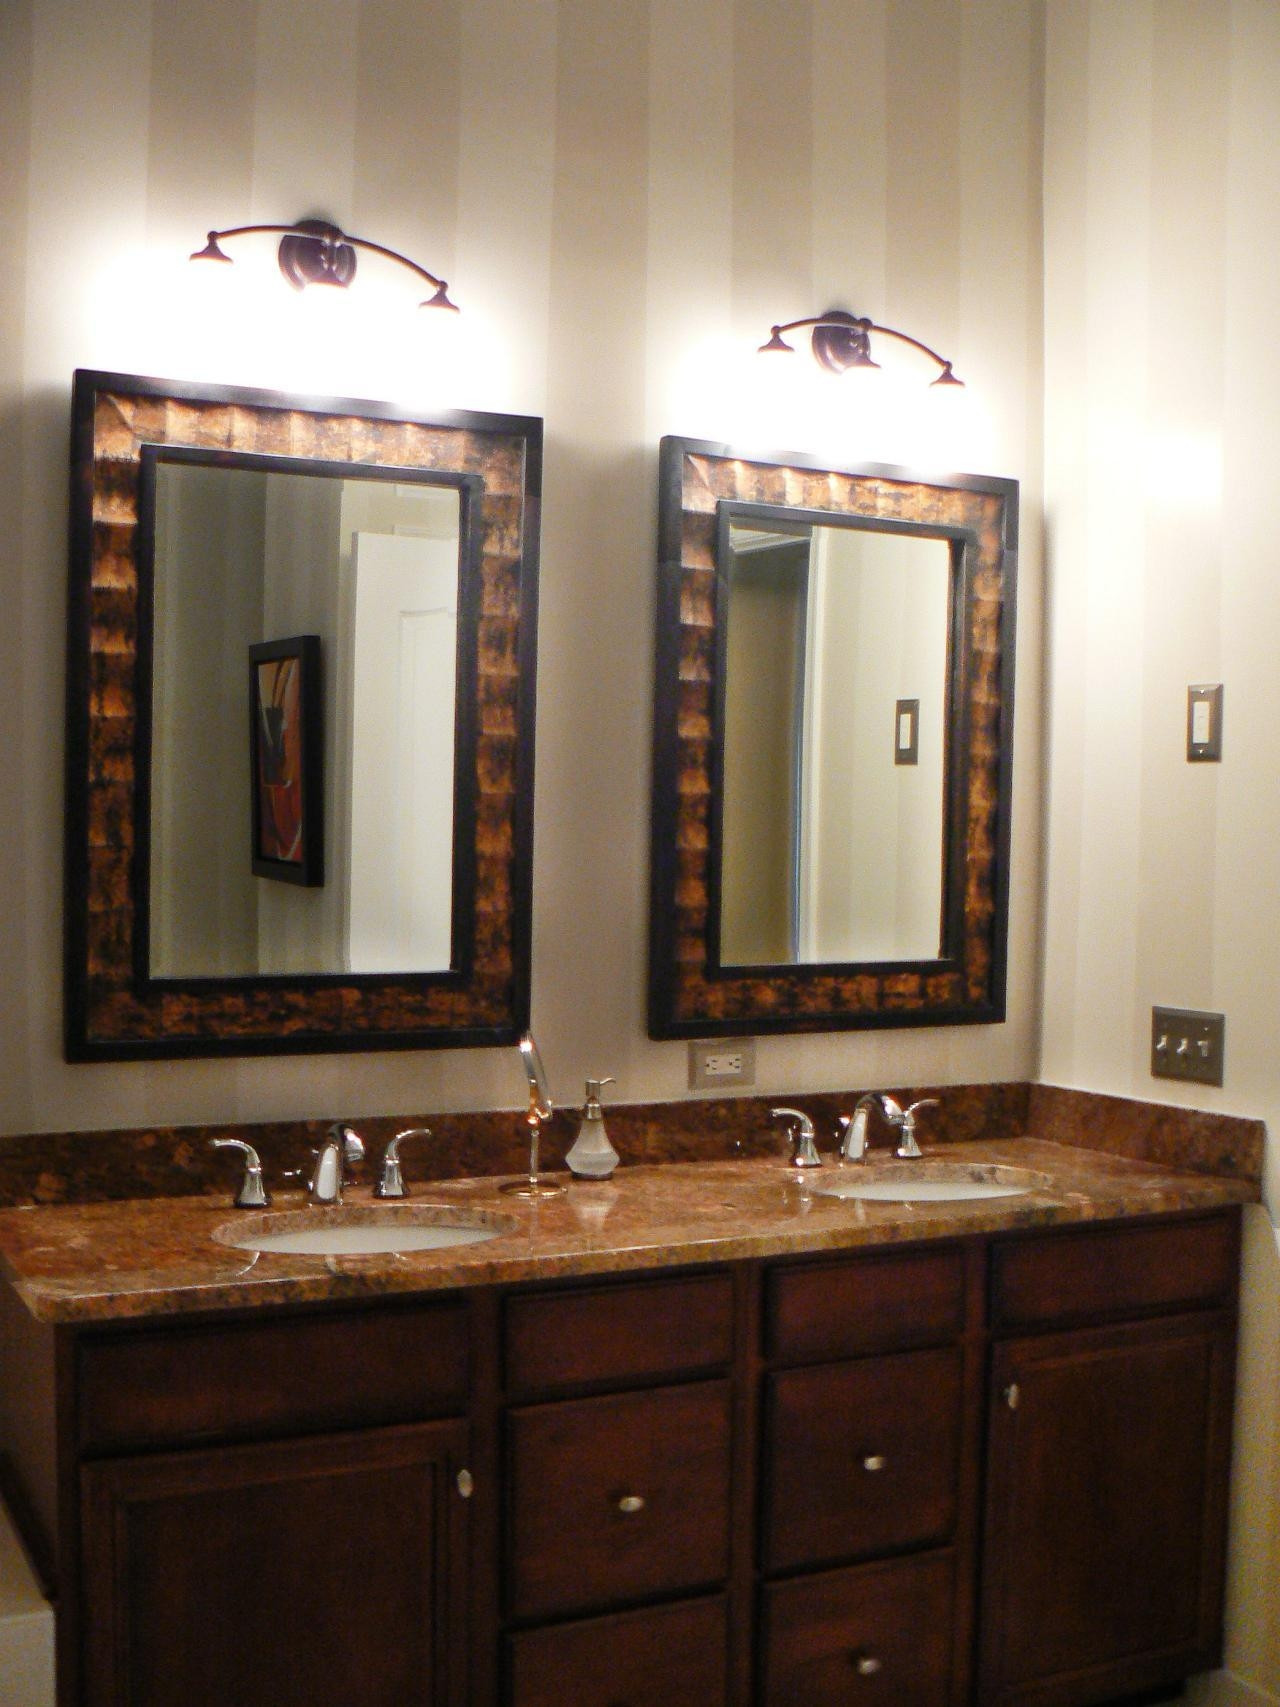 Bathroom Cabinet Mirrors
 20 Collection of Decorative Mirrors for Bathroom Vanity